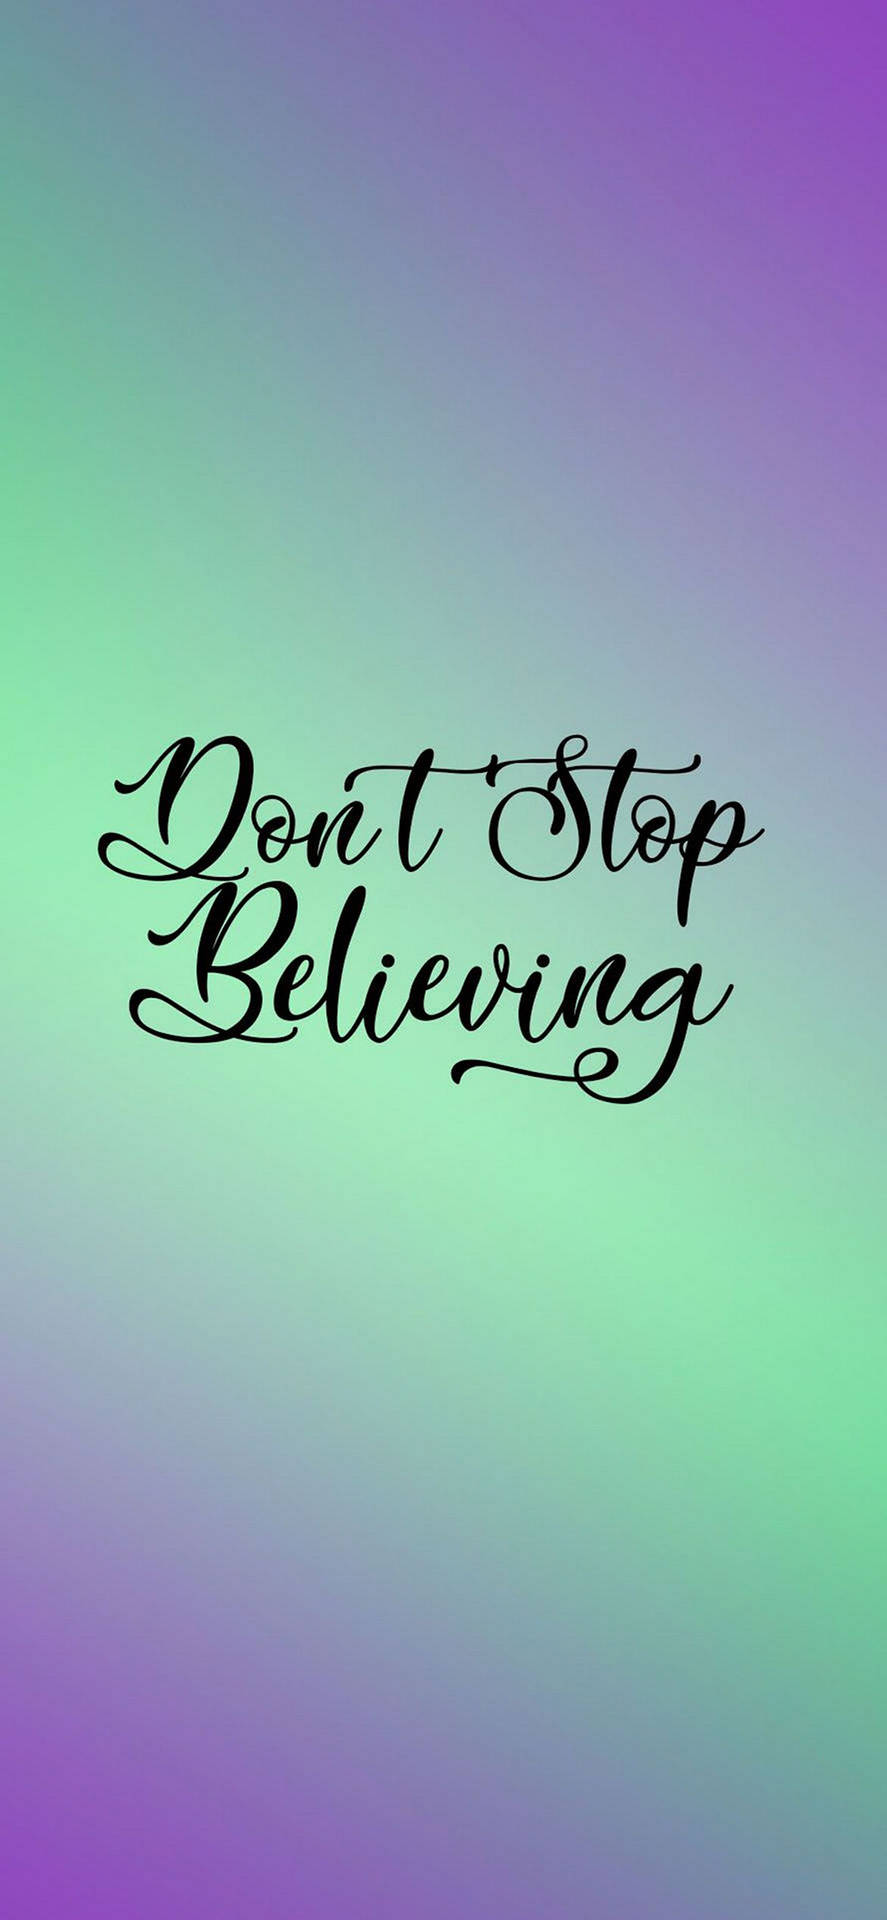 Don't Stop Believing Motivational Iphone